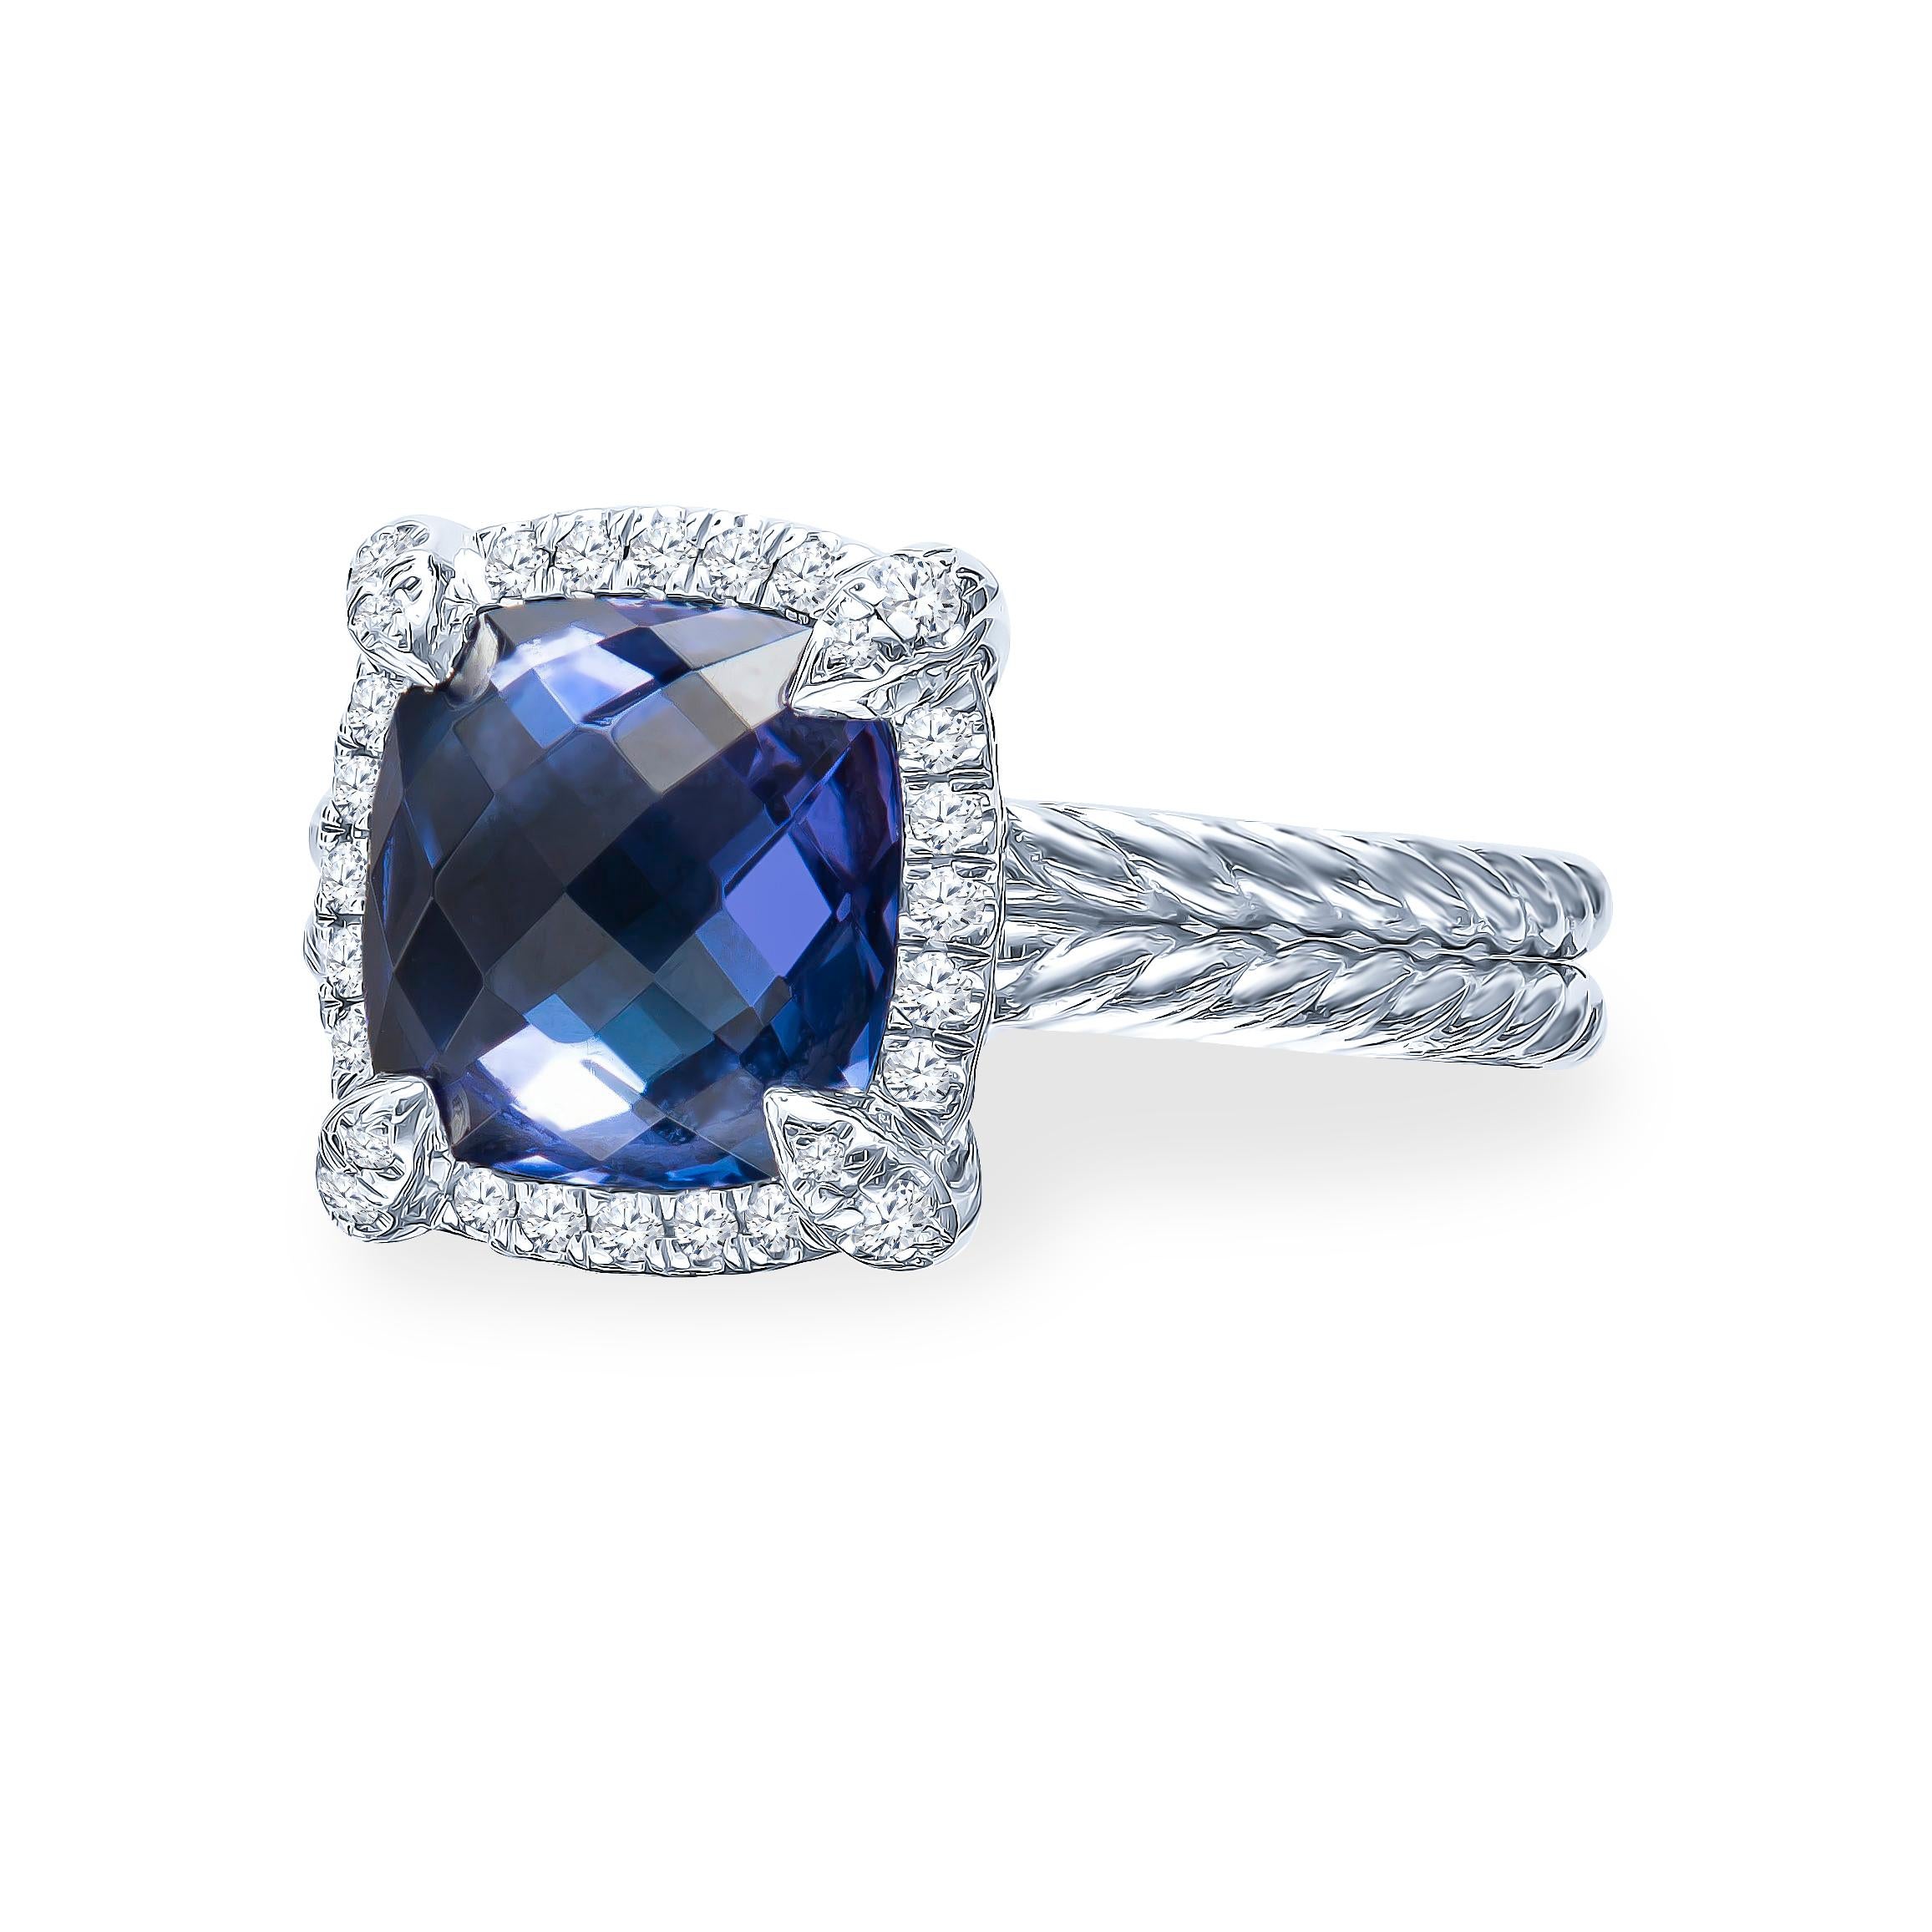 This classic David Yurman ring features a faceted tanzanite with 0.15 carats total of pave-set accent diamonds that surround the stone. Made in 18K white gold with a double spiral band that is a size 6. Comes with original David Yurman box.